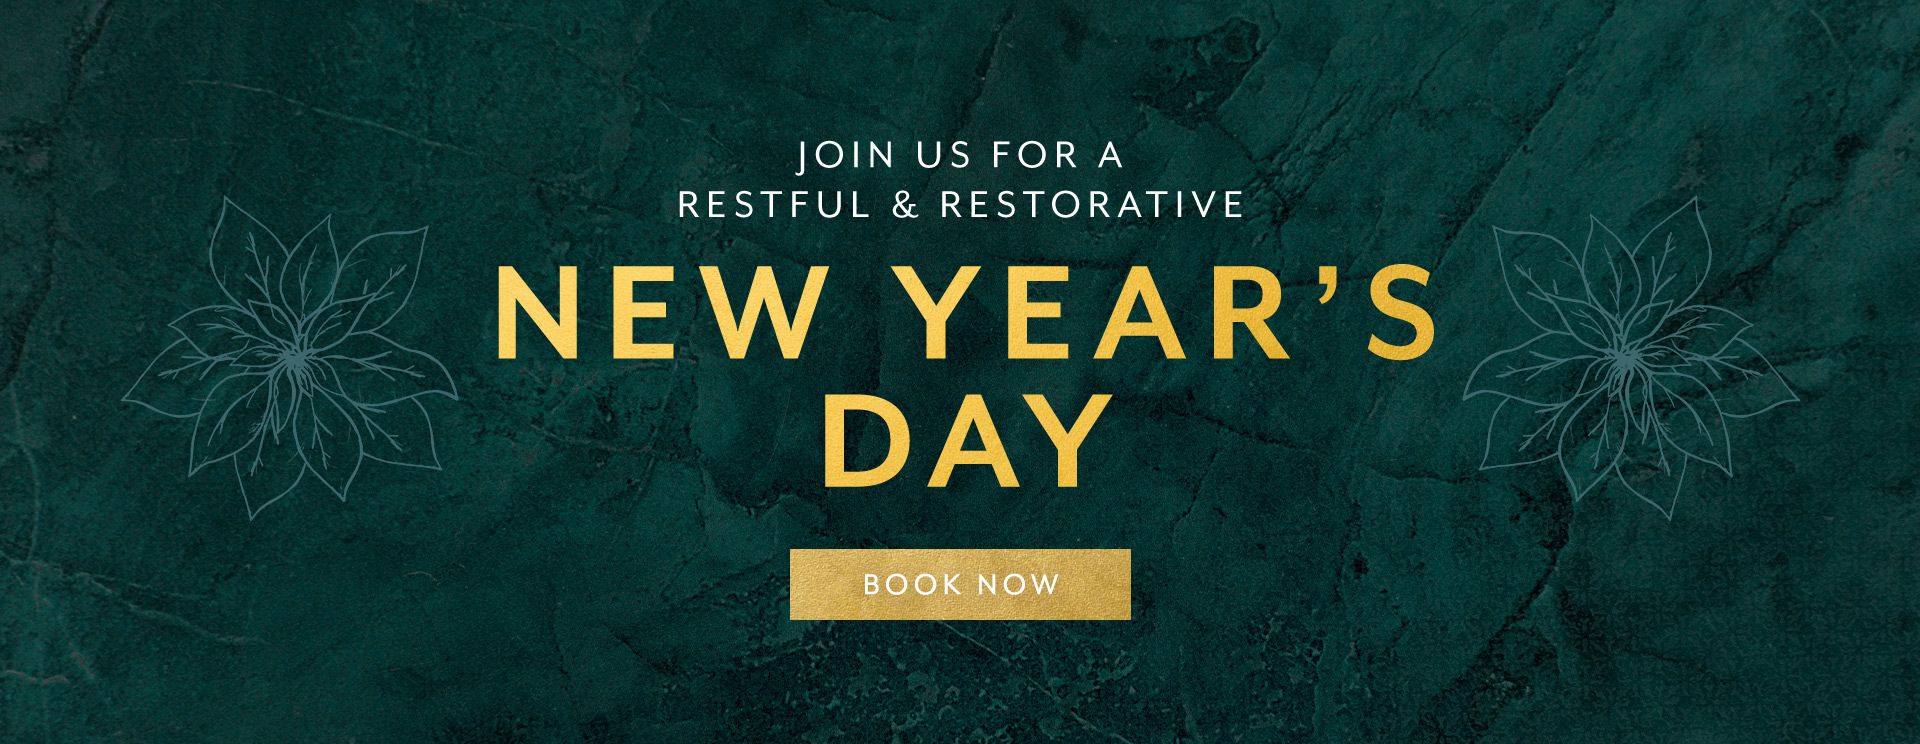 New Year's Day at The Plough Inn